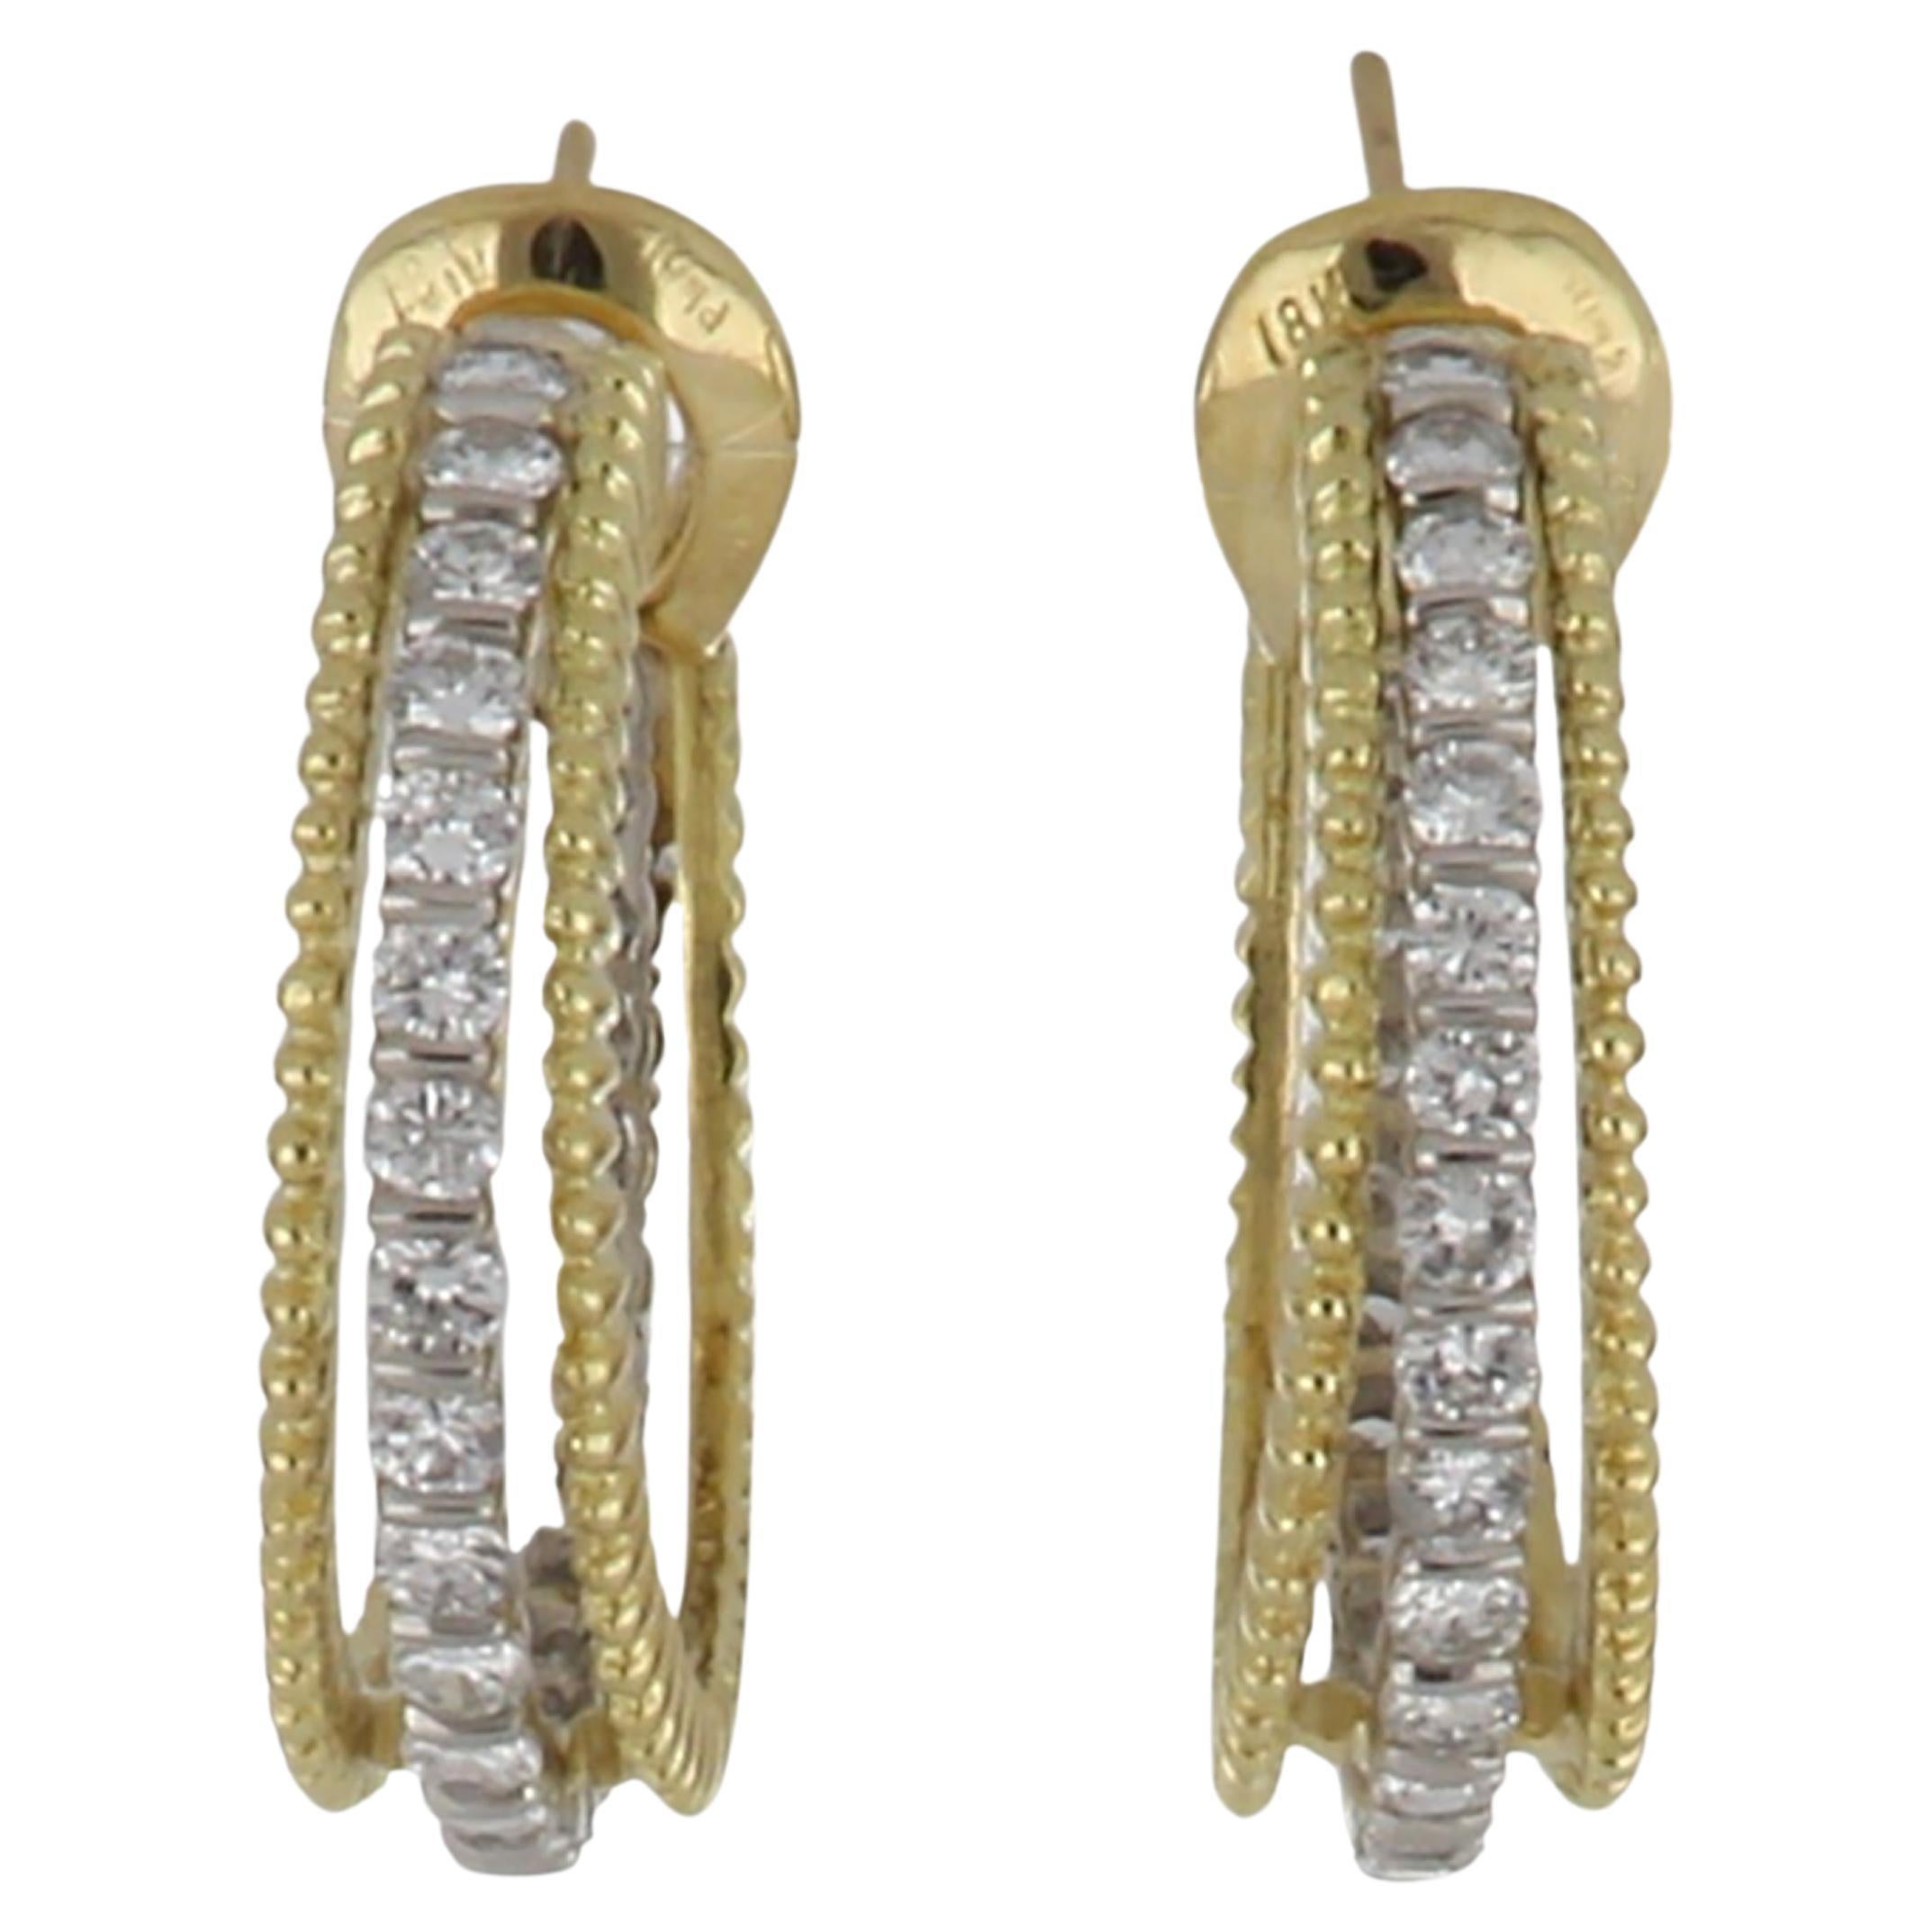 Vintage 1970s Tiffany & Co. Diamond Hoop Earrings in 18K Gold and Platinum For Sale